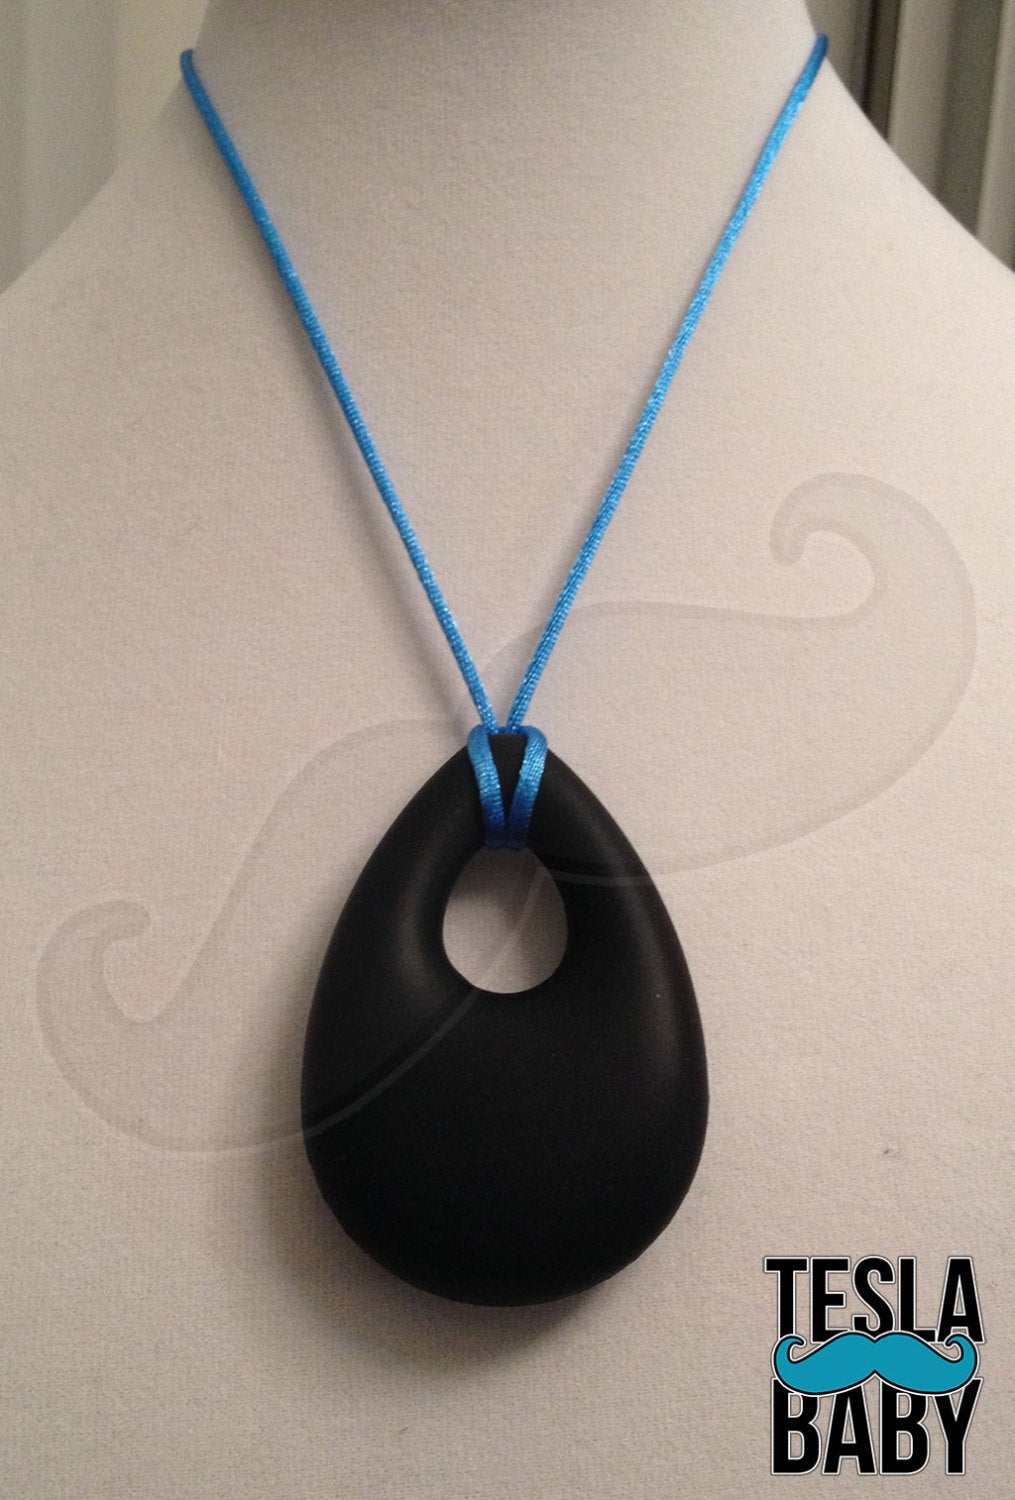 Silicone Pendant Necklace -- 3 7/8" x 2" red silicone teardrop pendant; for fidgeting, sensory play, teething.